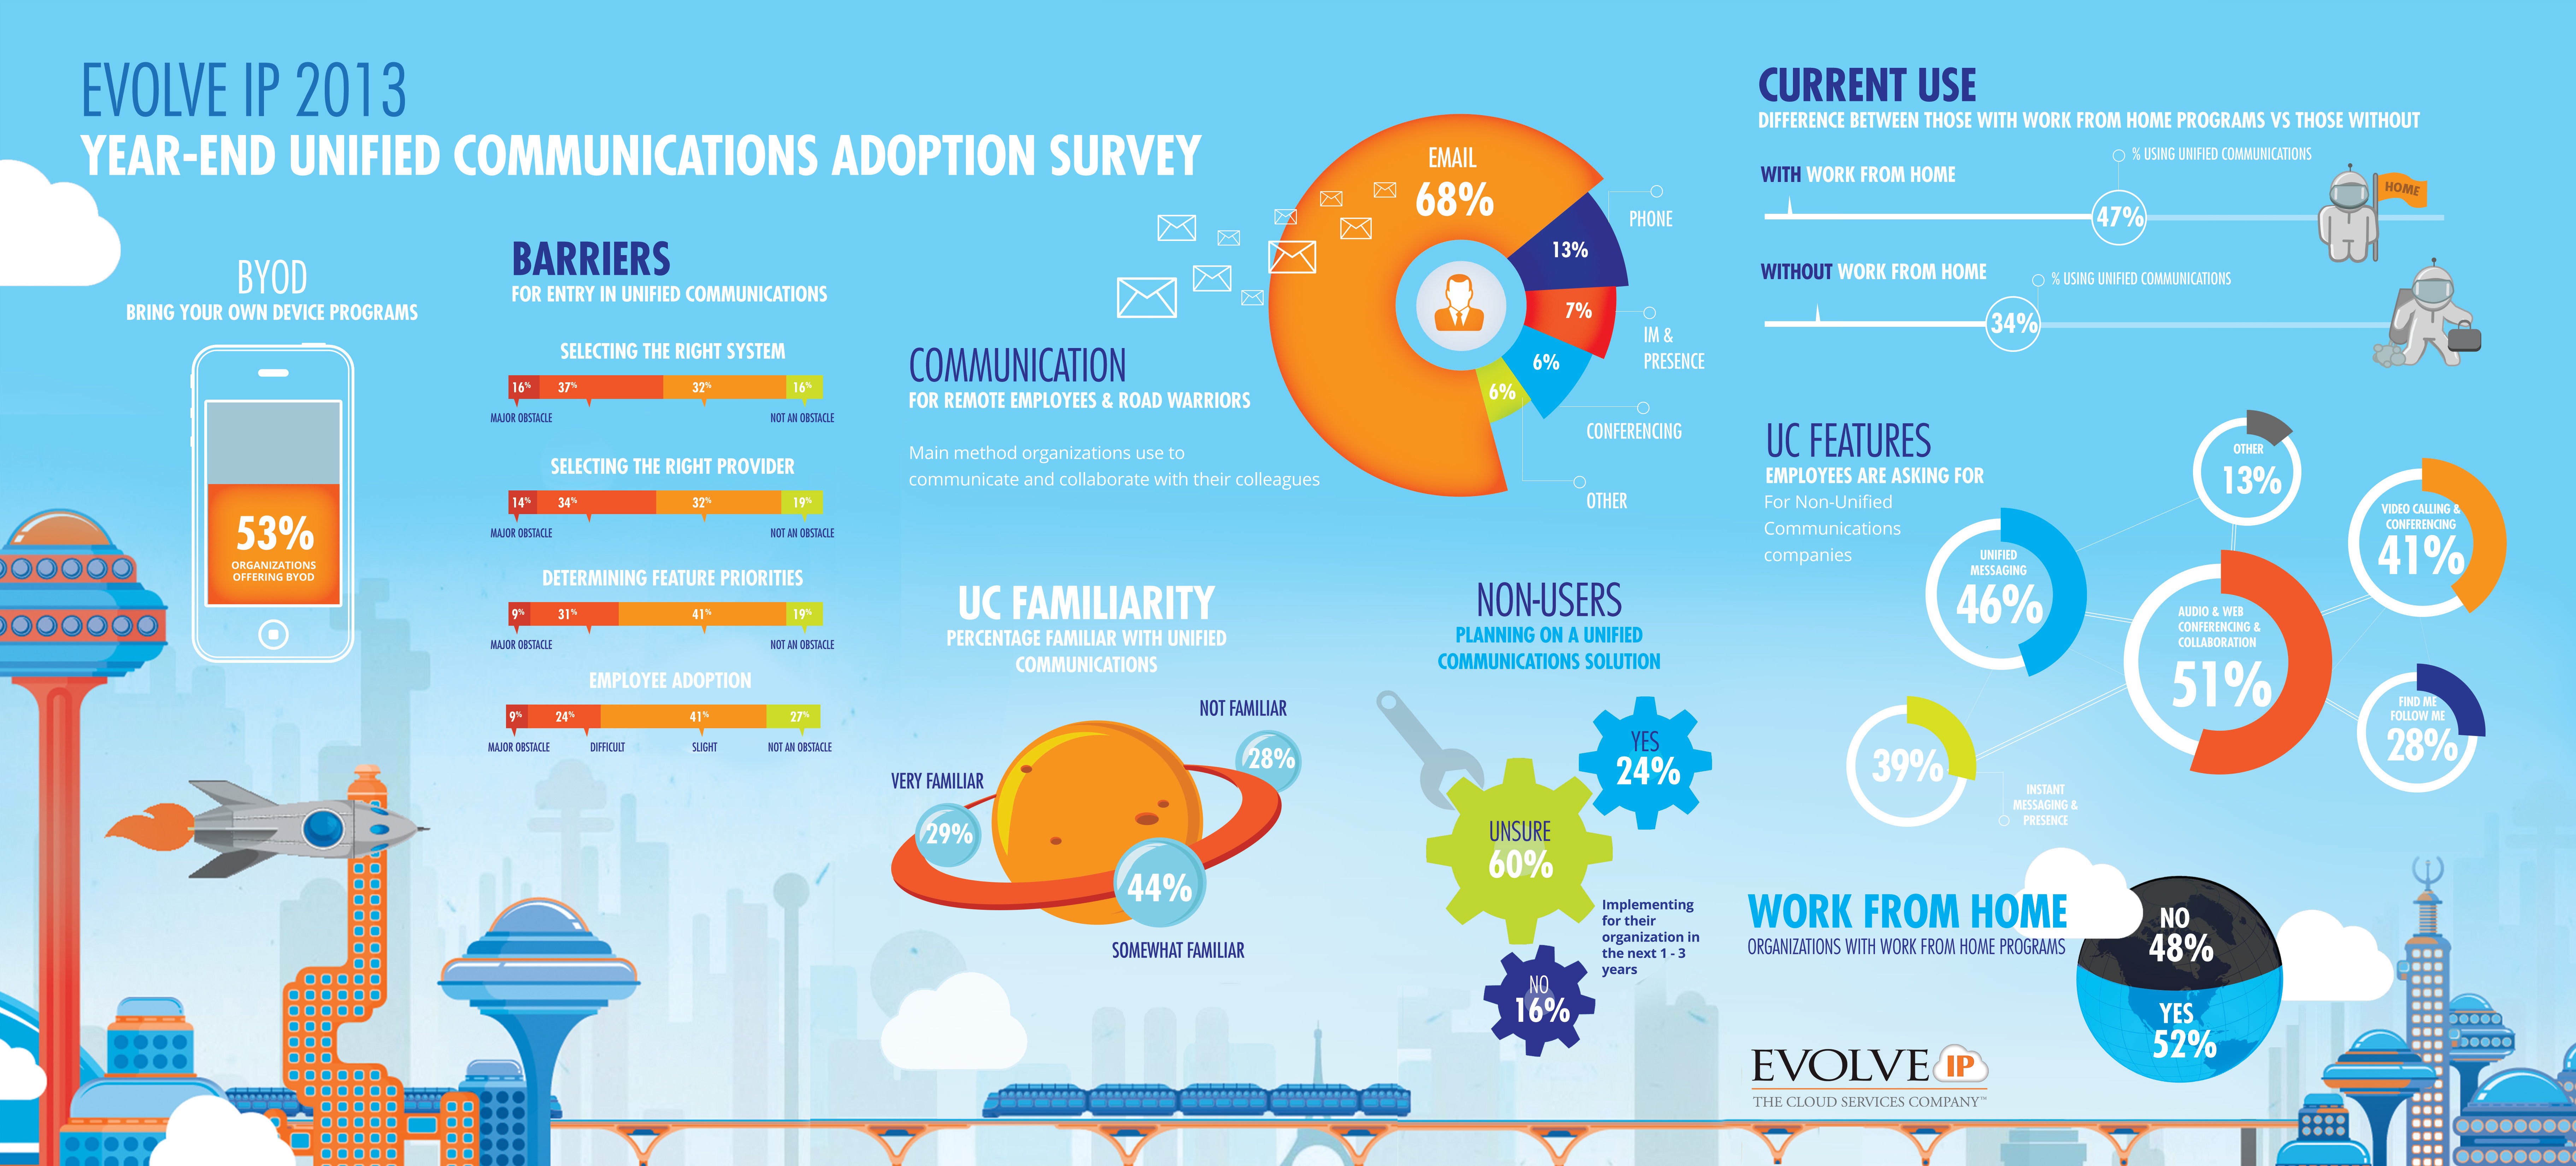 2013 Year-End Unified Communications Adoption